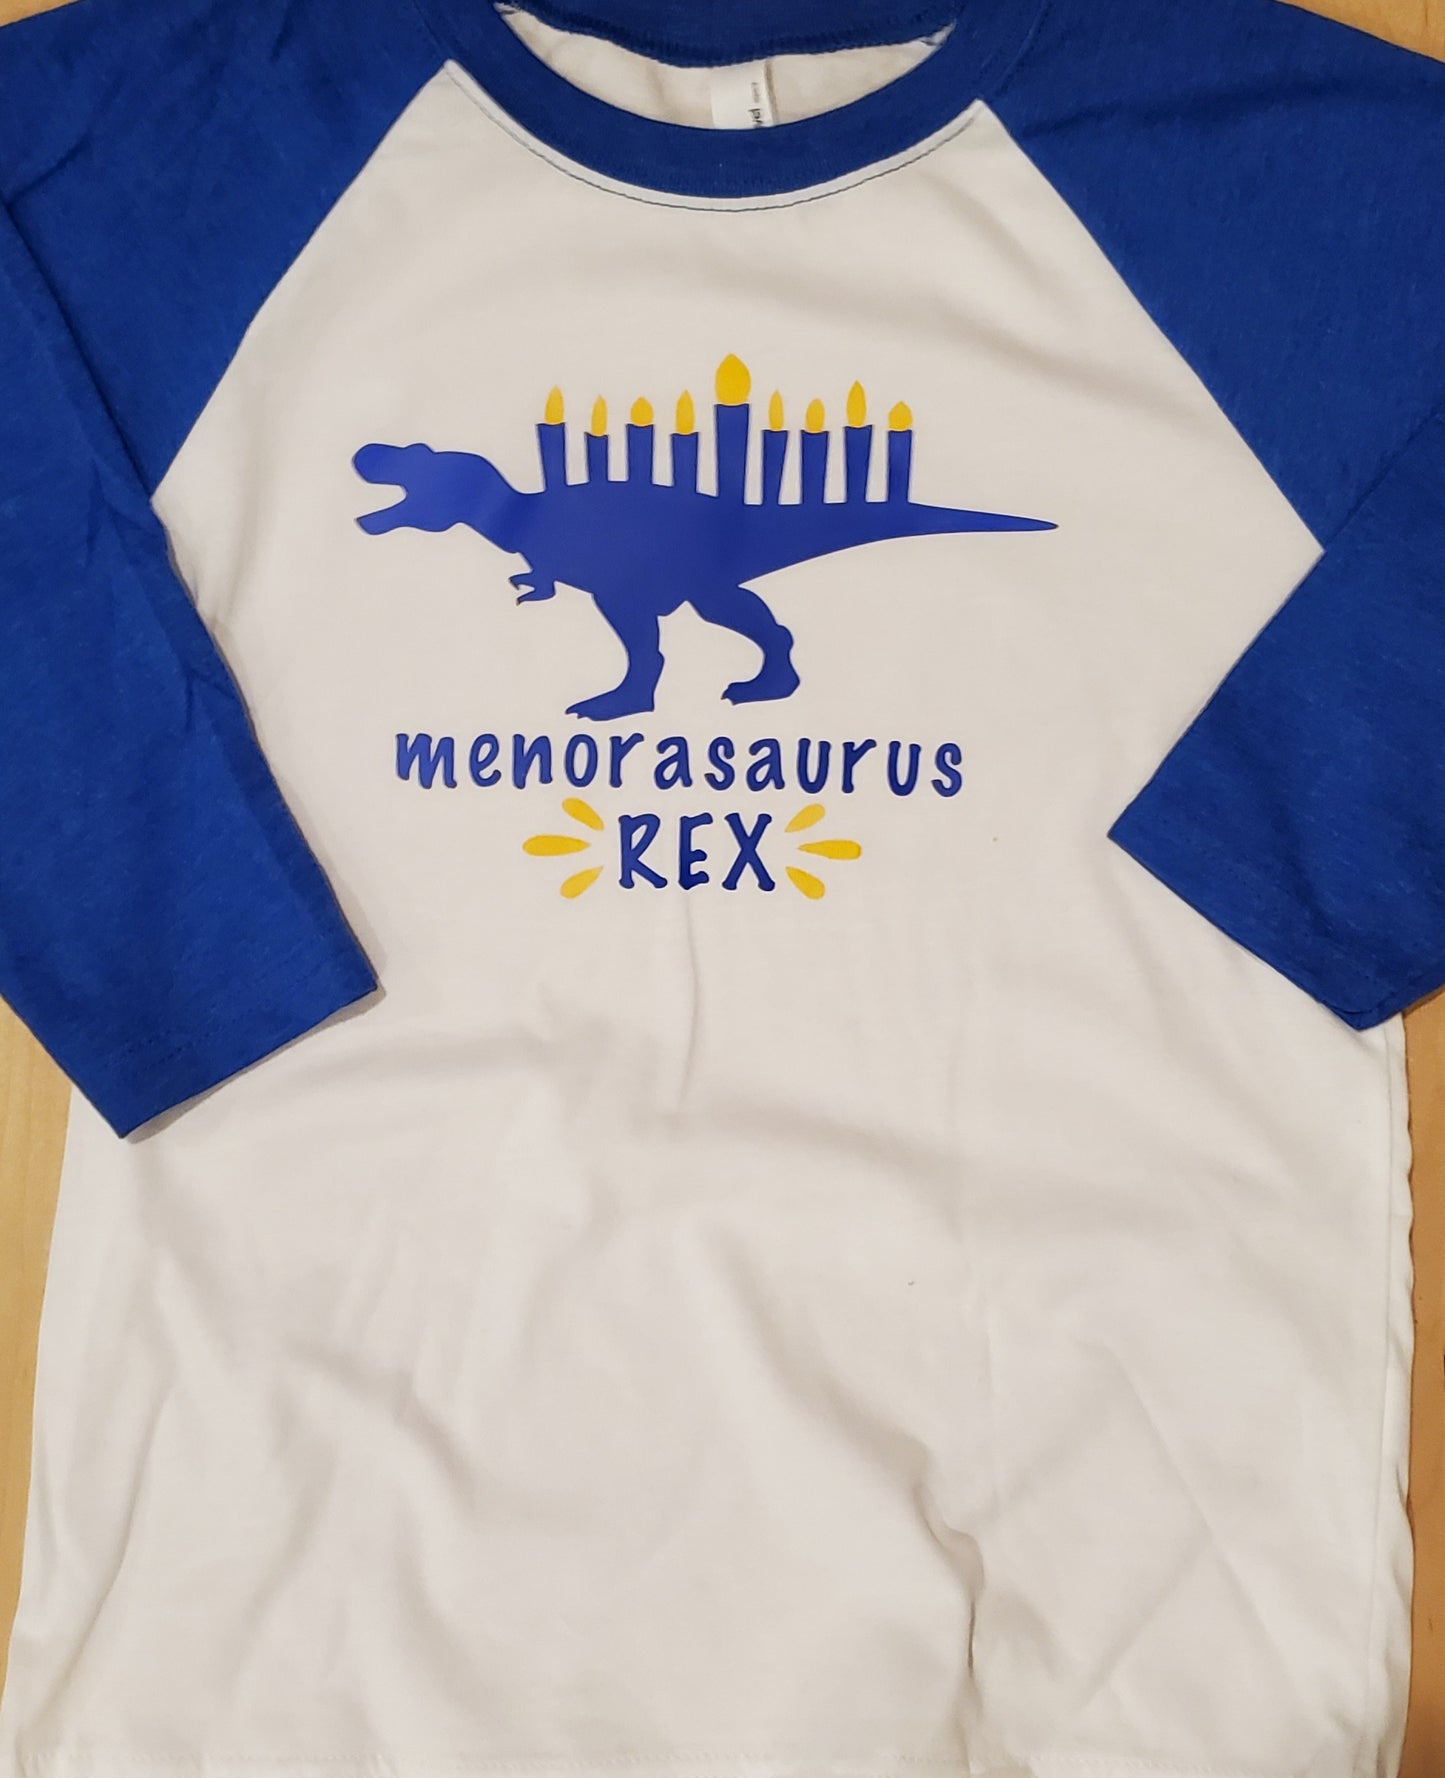 White tshirt with blue sleeves with a T-Rex dinosaur with a menorah on its back with blue lettering spelling Menorasaurus Rex below